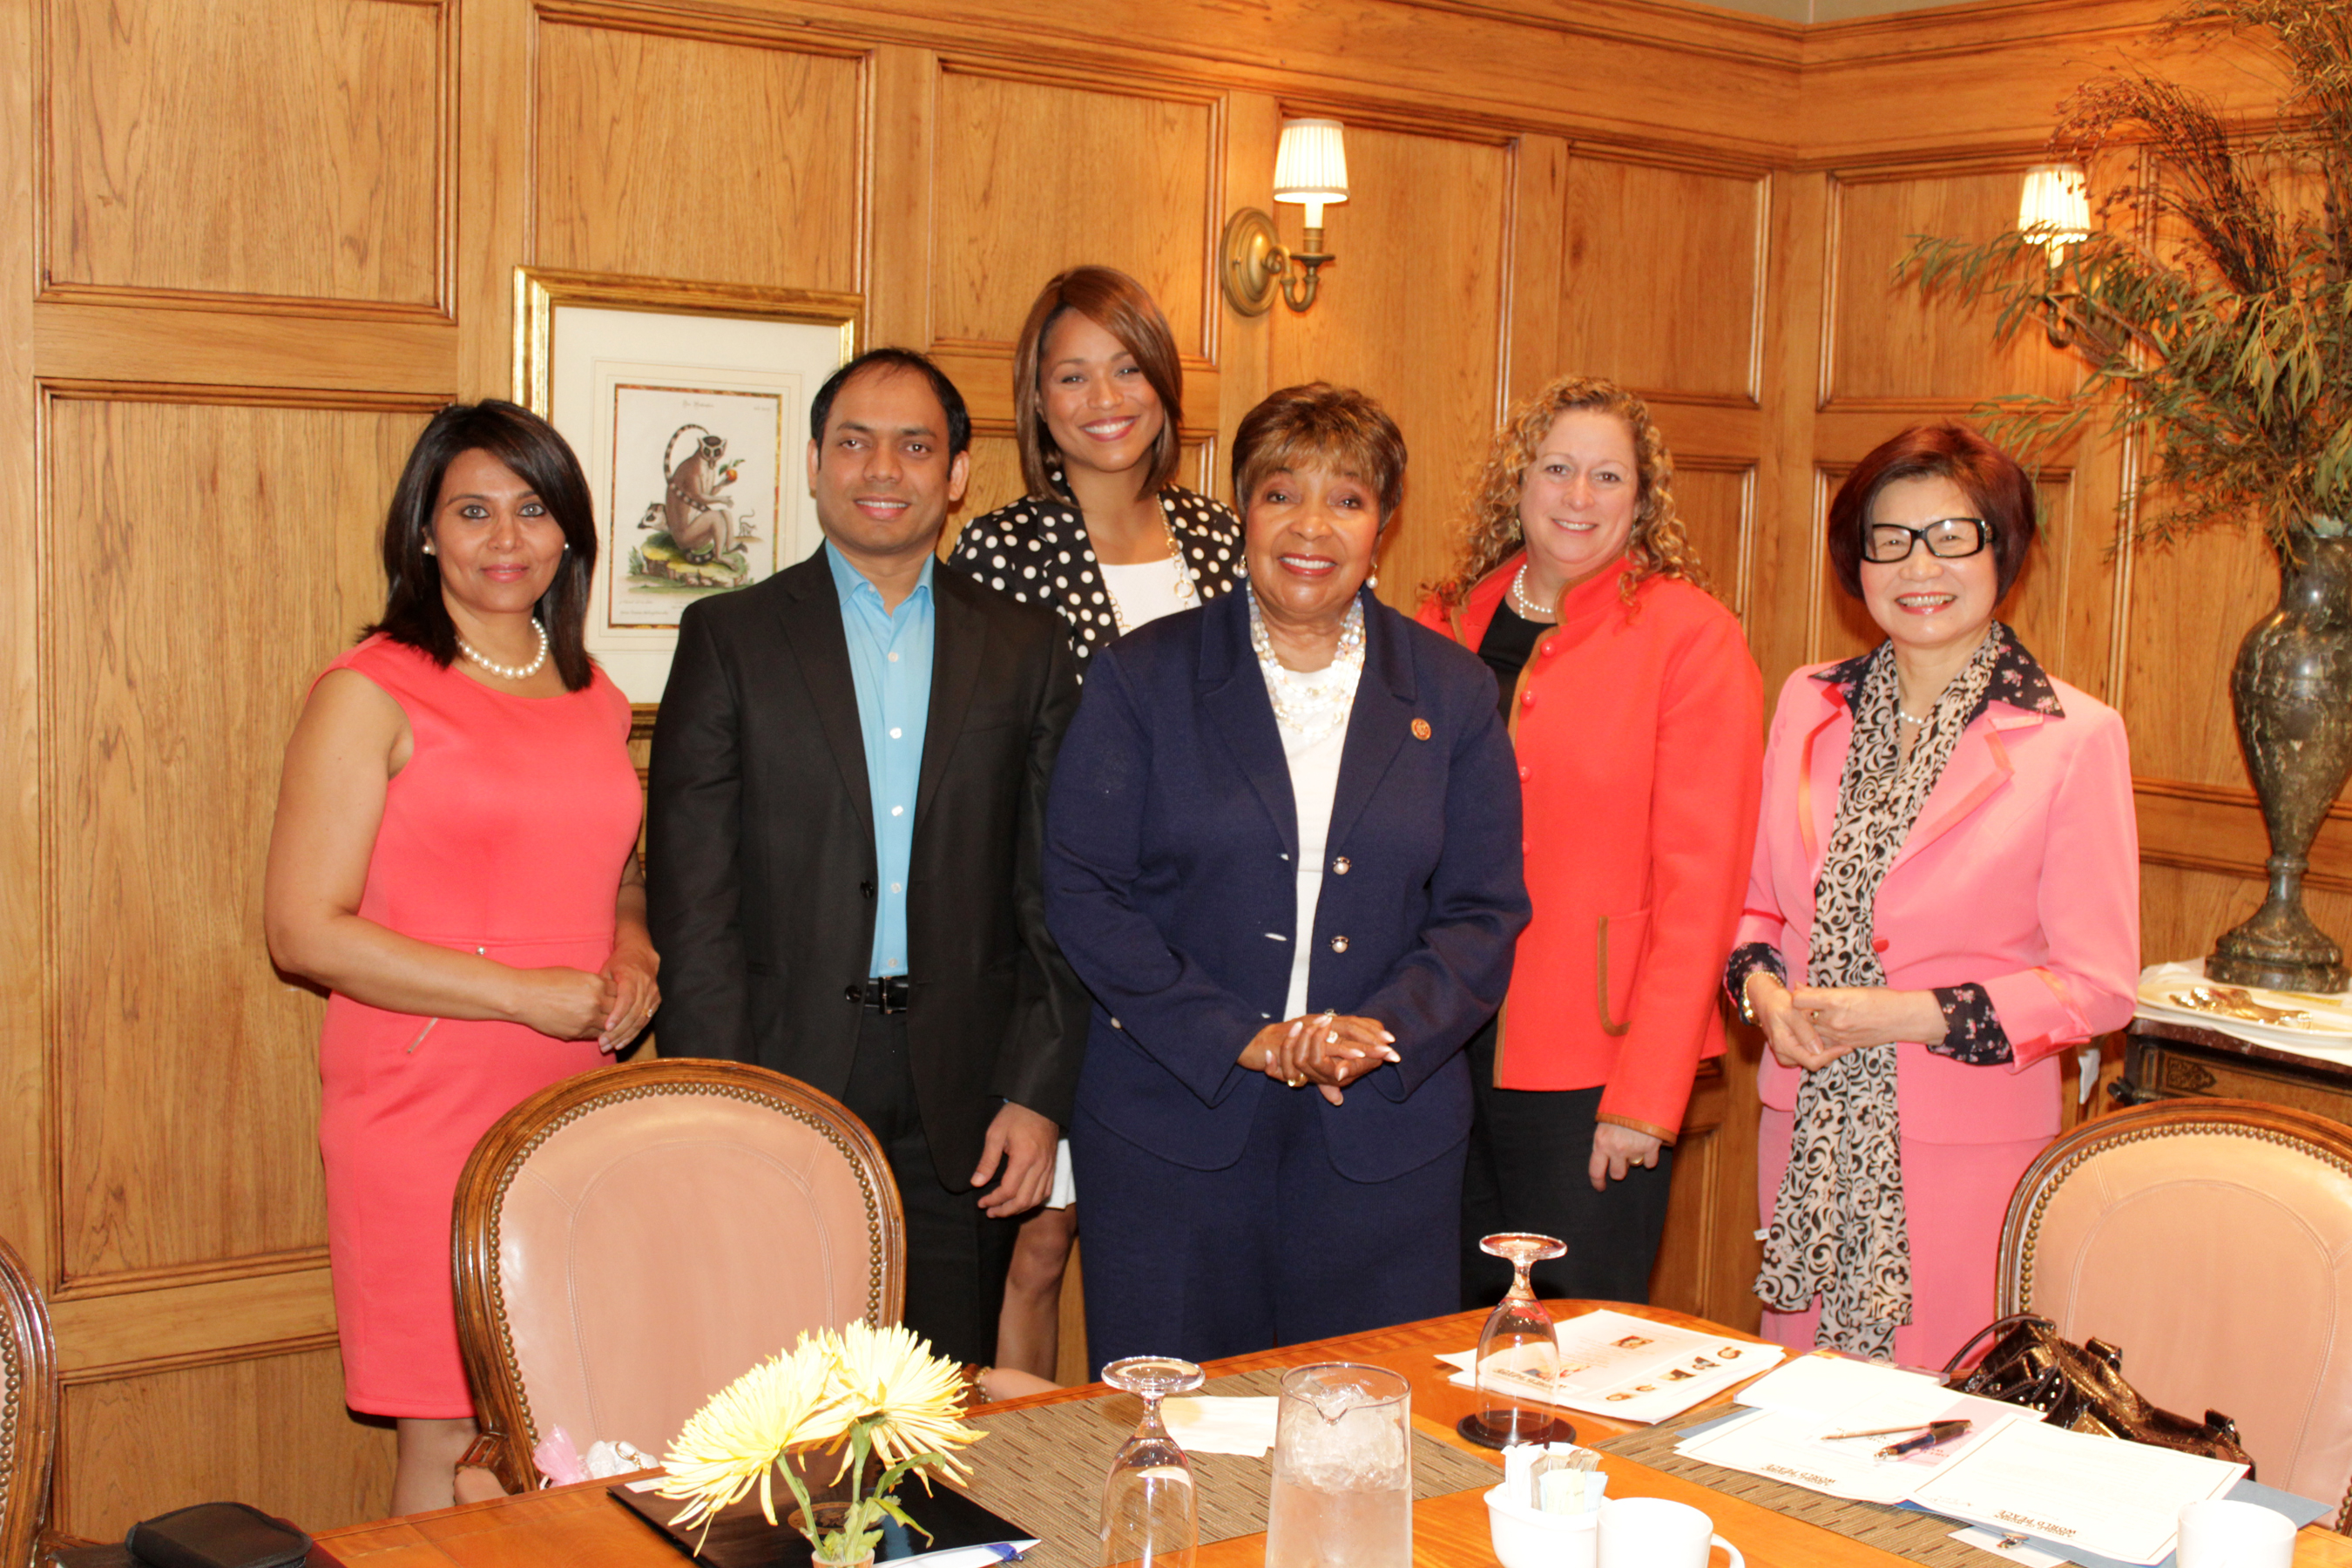 Congresswoman Eddie Bernice Johnson hosted the 14th annual ‘A World of Women for World Peace’ conference in Dallas, Texas